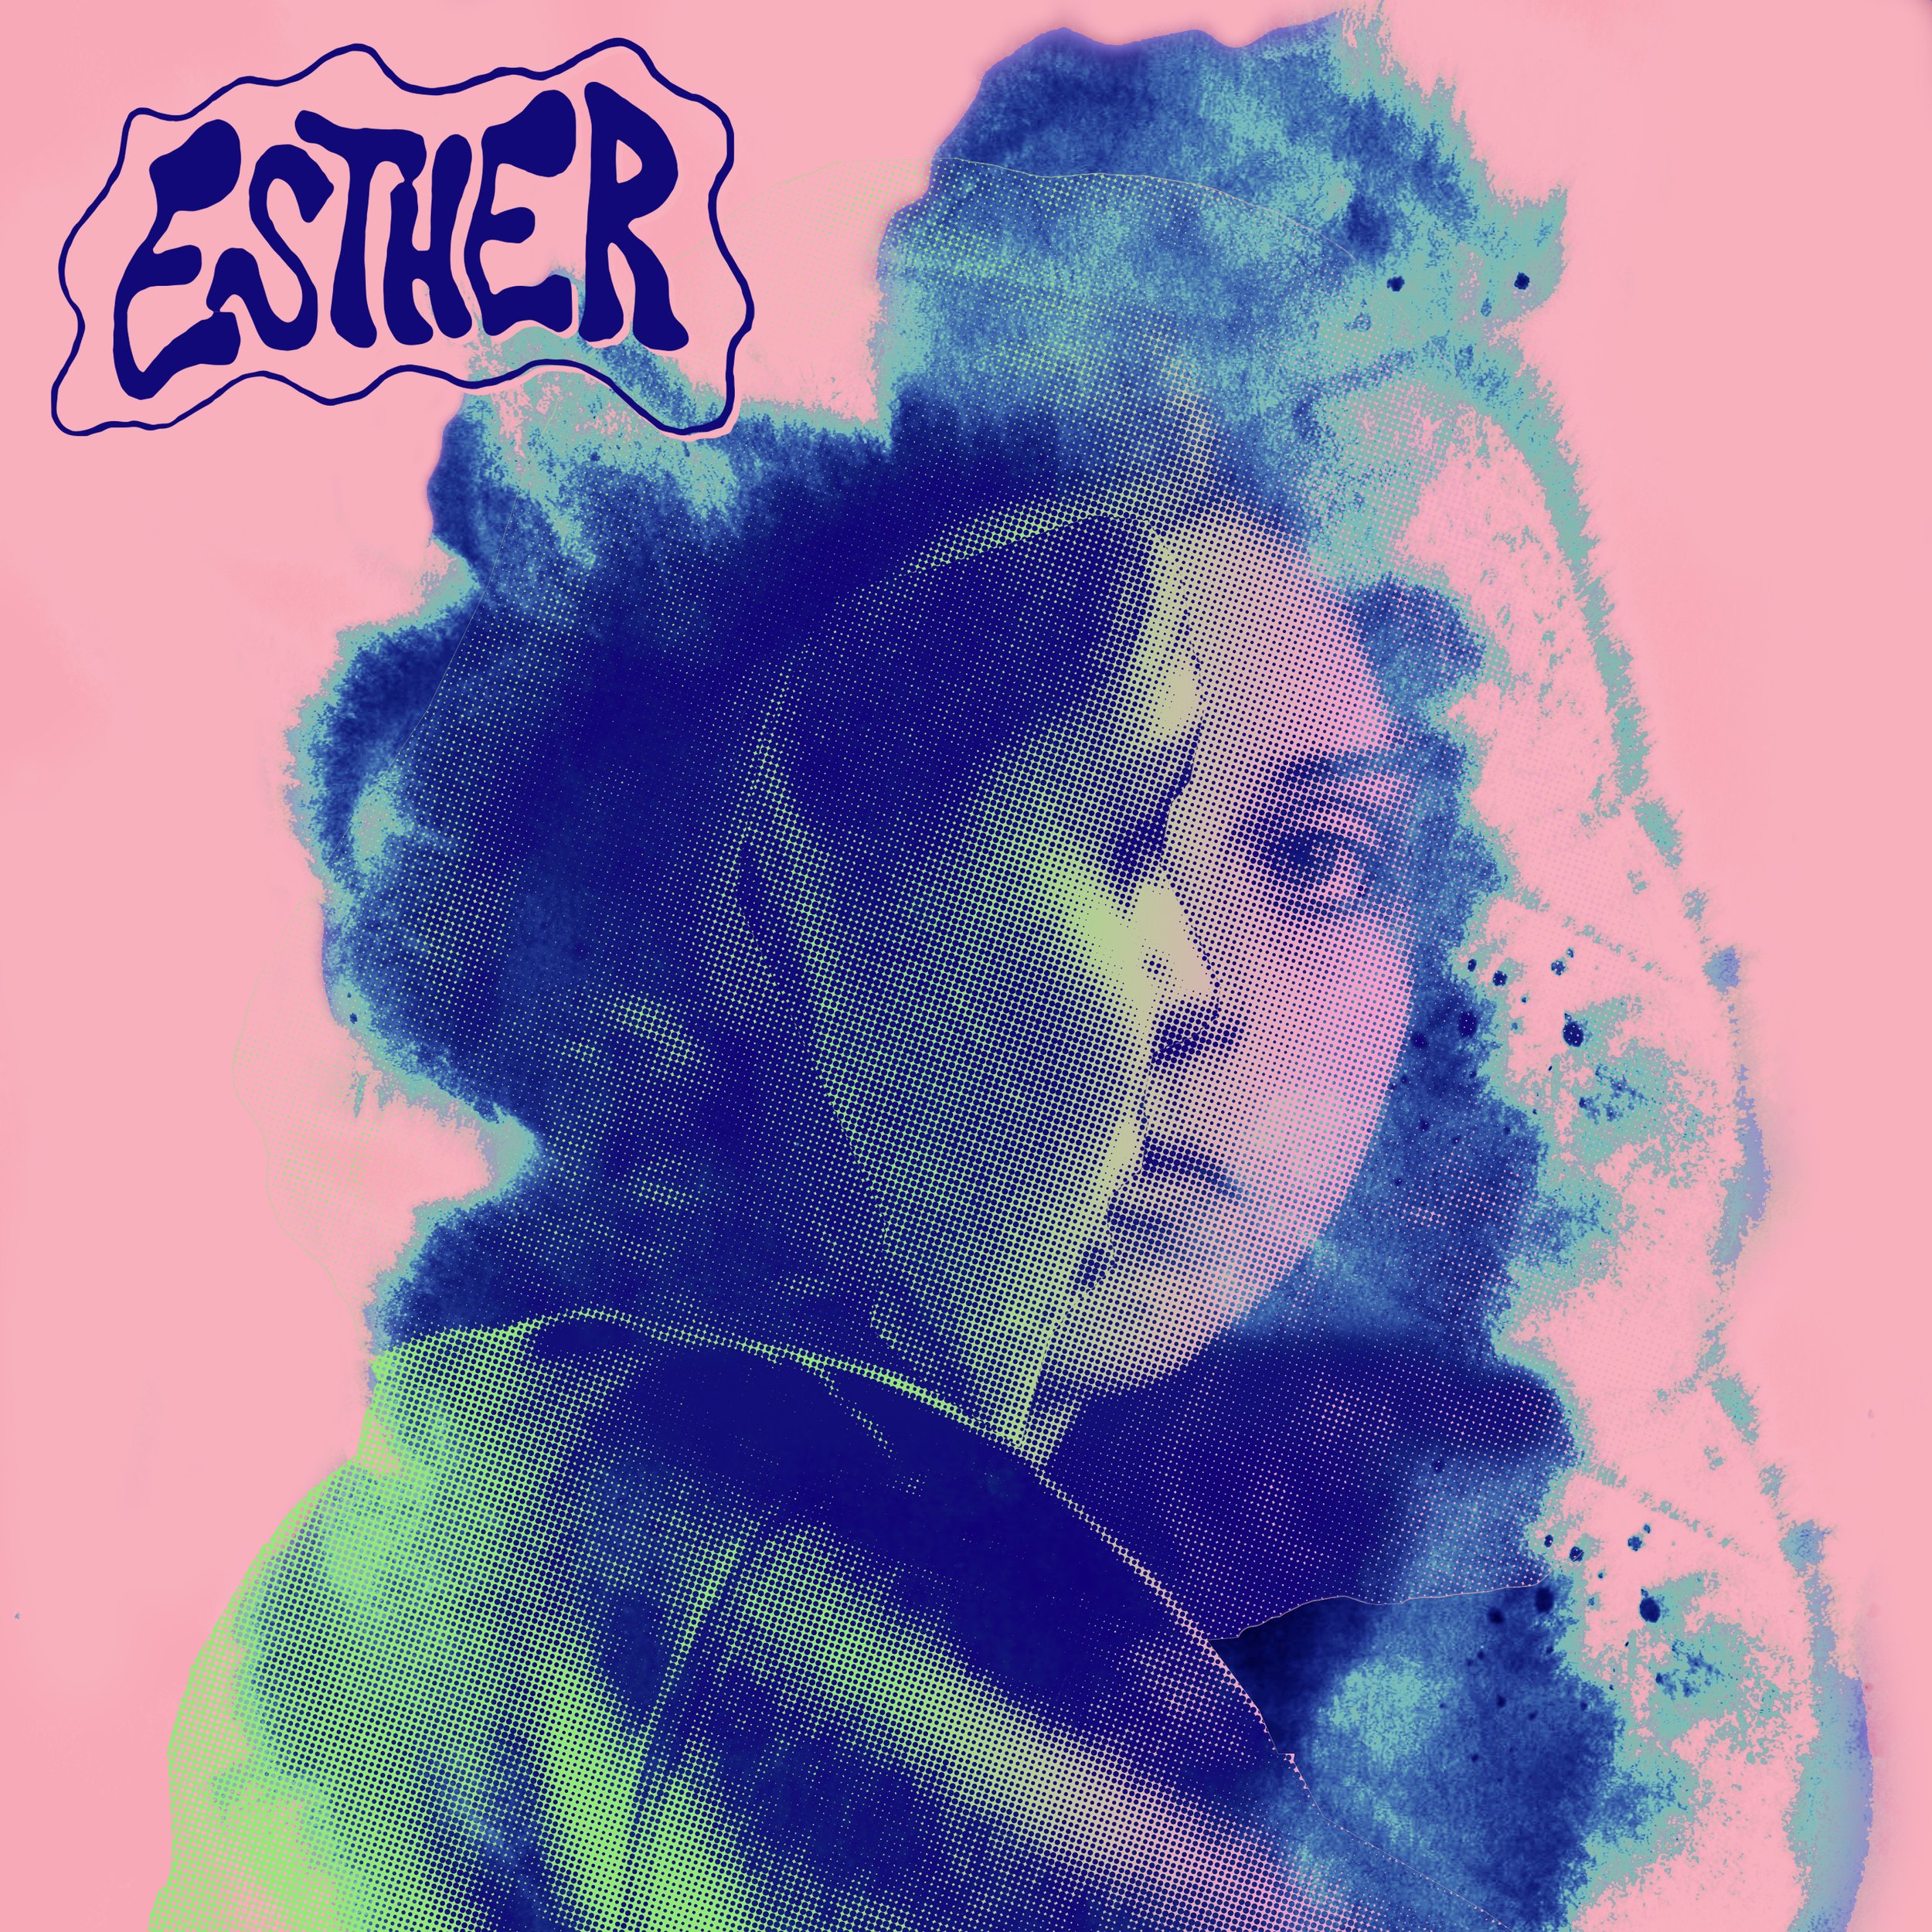 Esther - "Half a Heart Beating" - Single